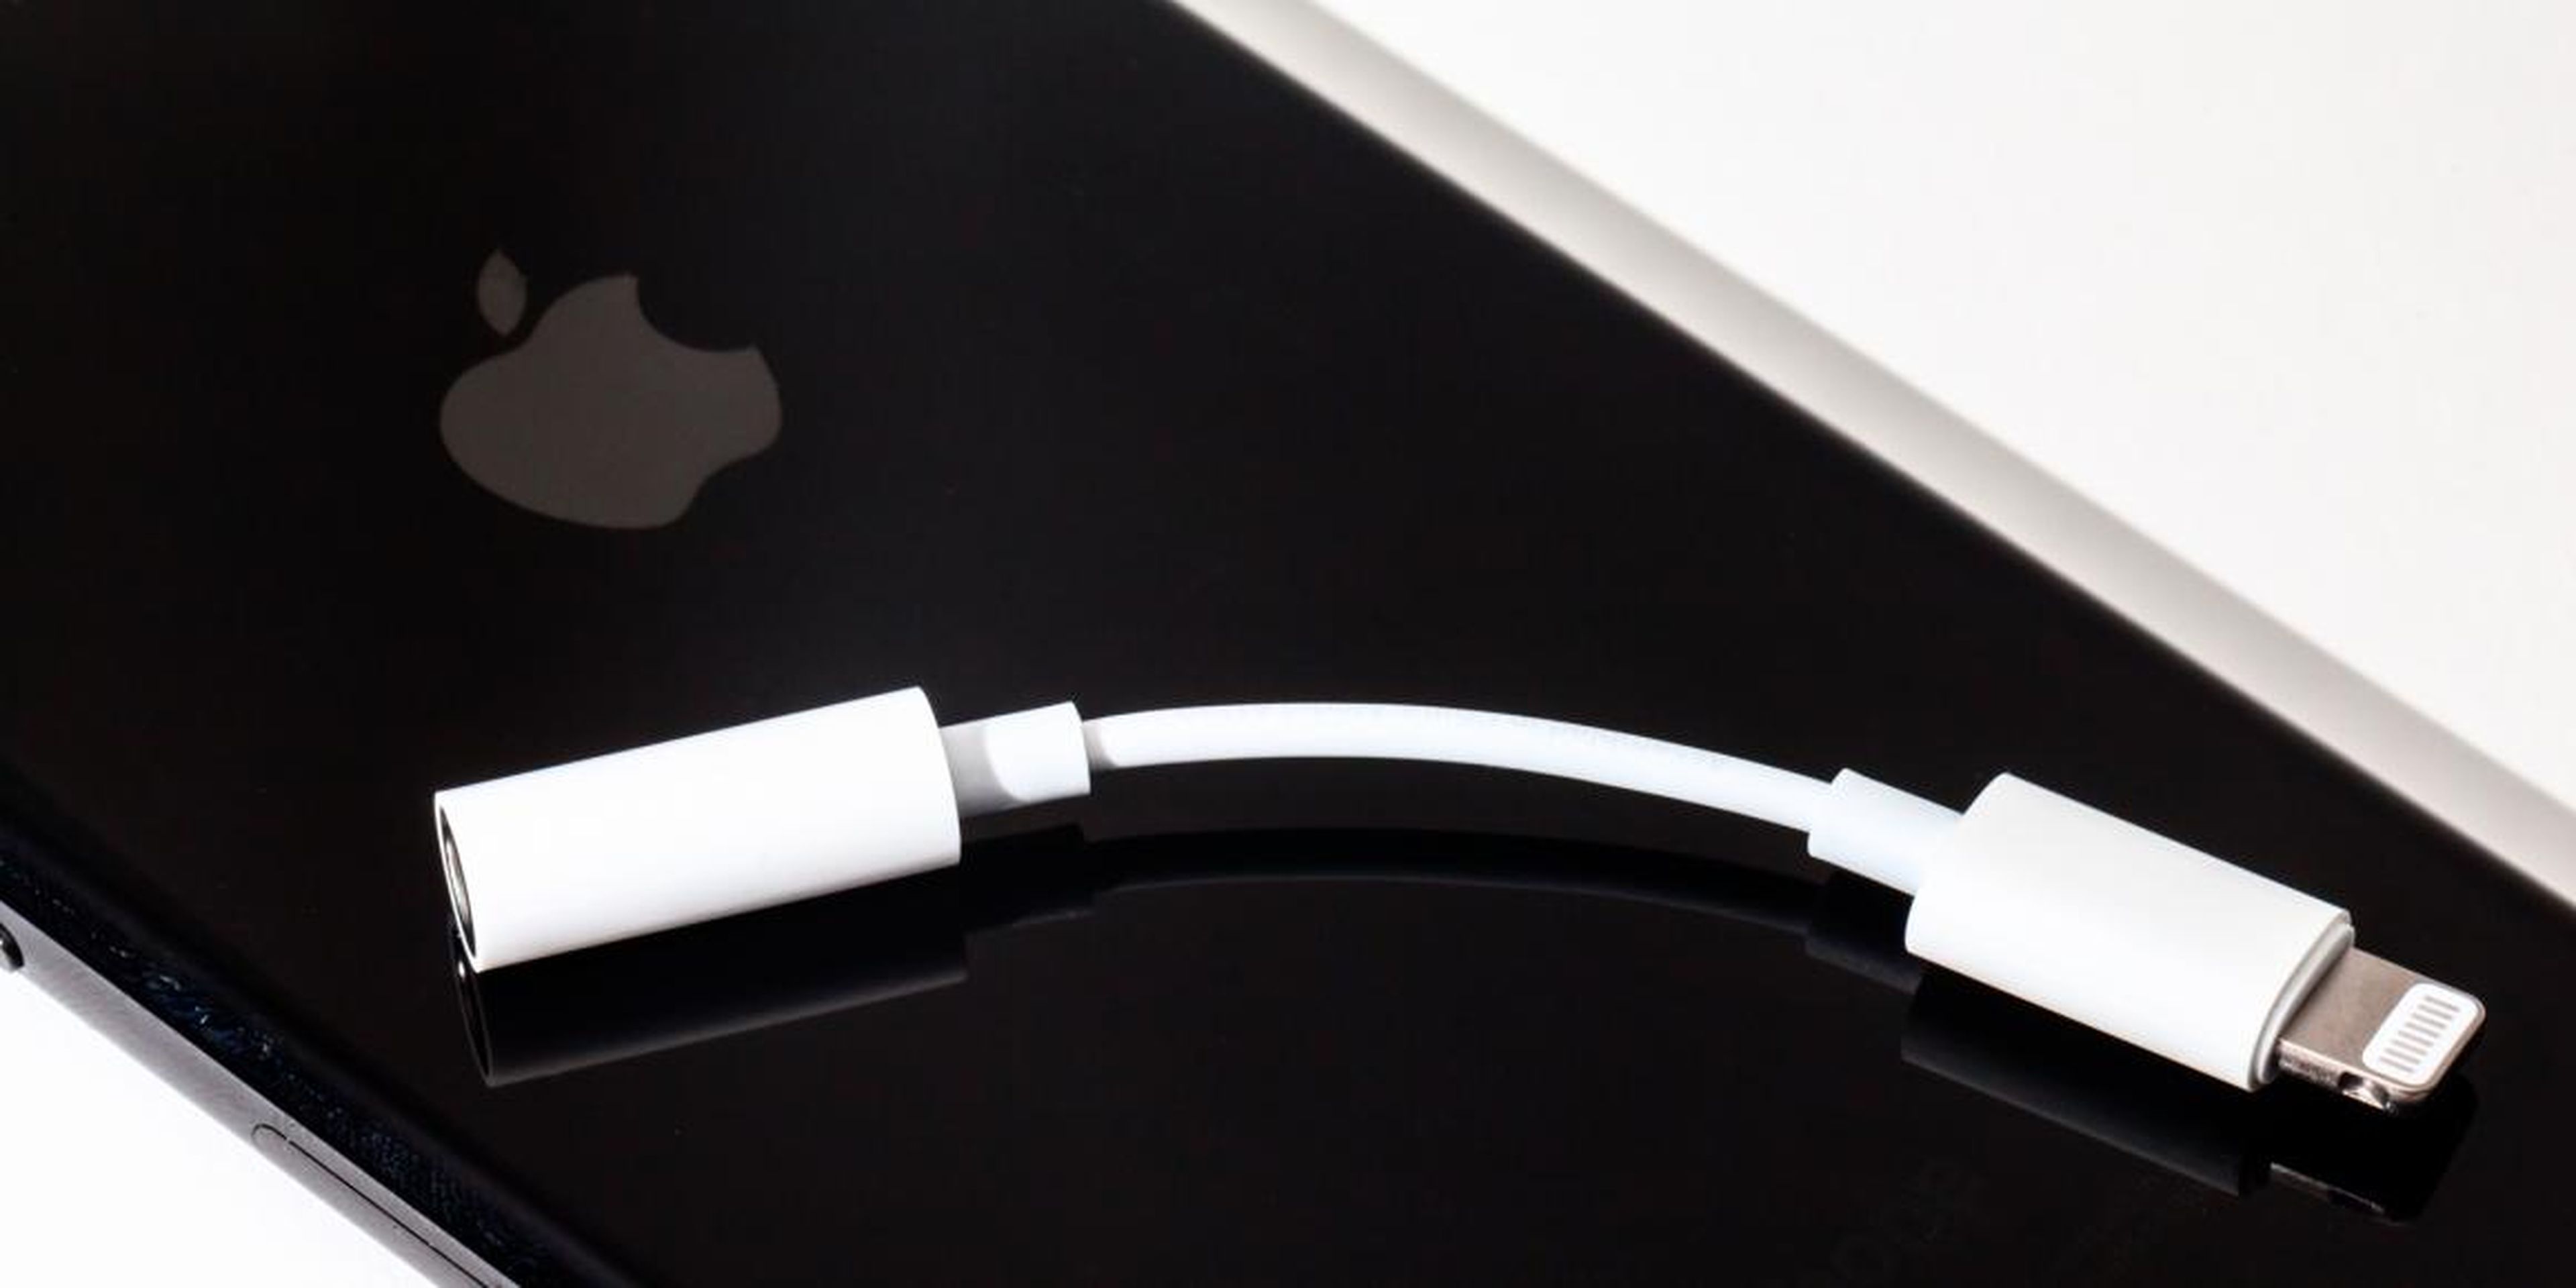 Apple won't include a free headphone dongle with newly-purchased iPhones anymore